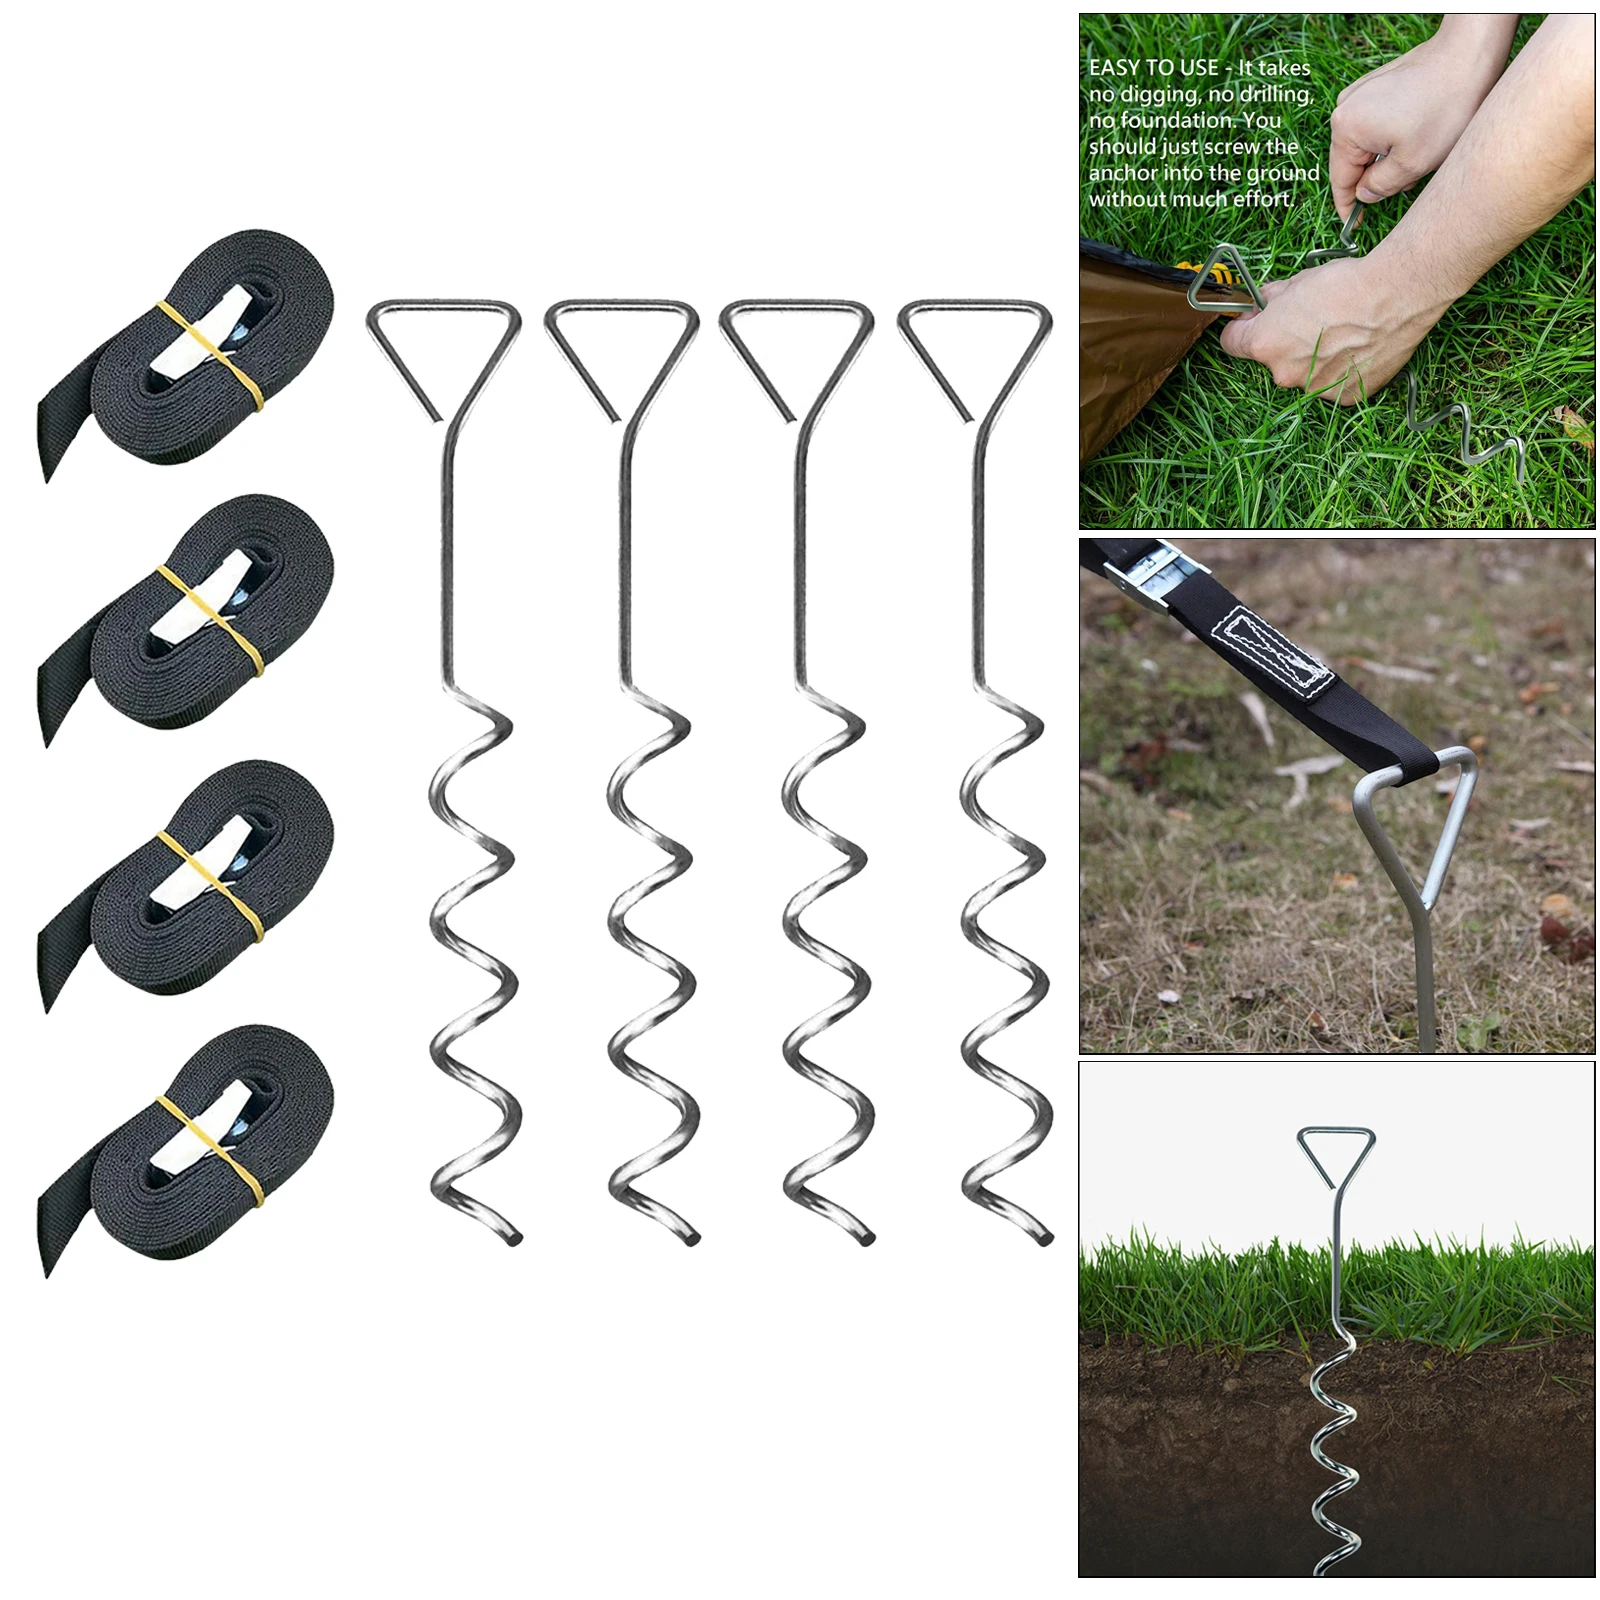 Fixed Ground Pegs for Dog Walking and Tenting. ANLU LOAD Trampoline Anchors Trampoline Stakes-Spiral Steel Stake Anchors for Trampoline